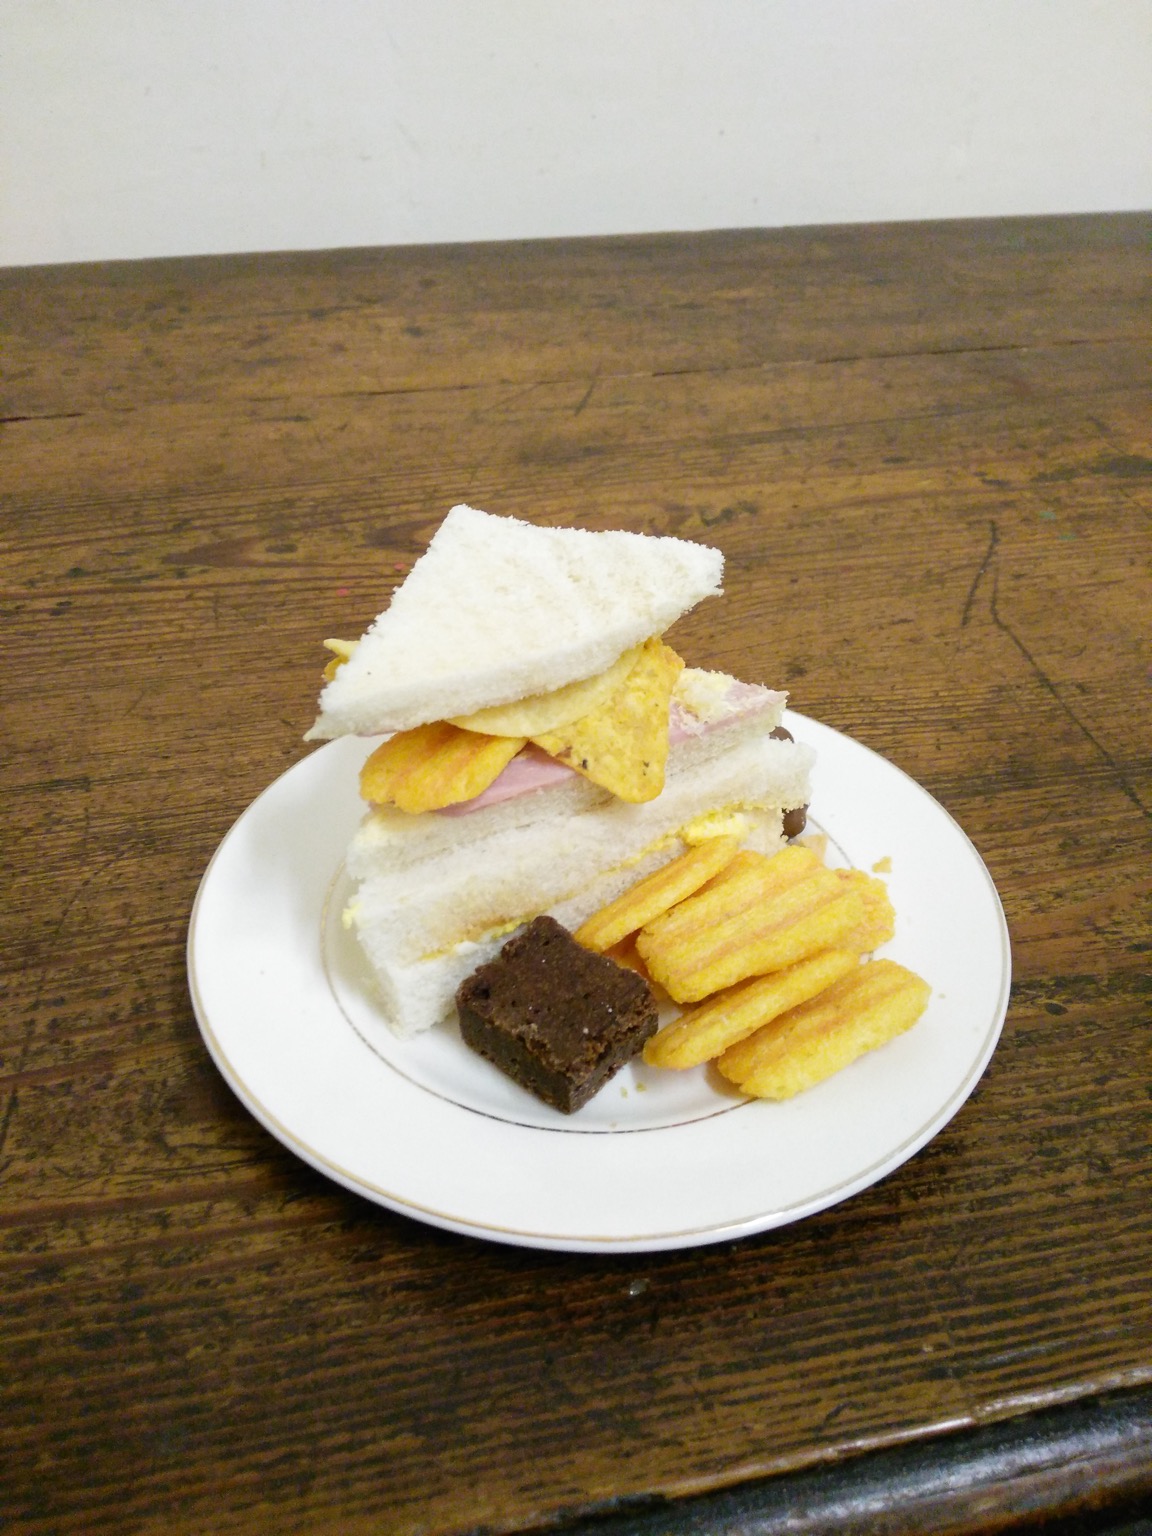 Frazzles and ham in a tiny crustless sandwich